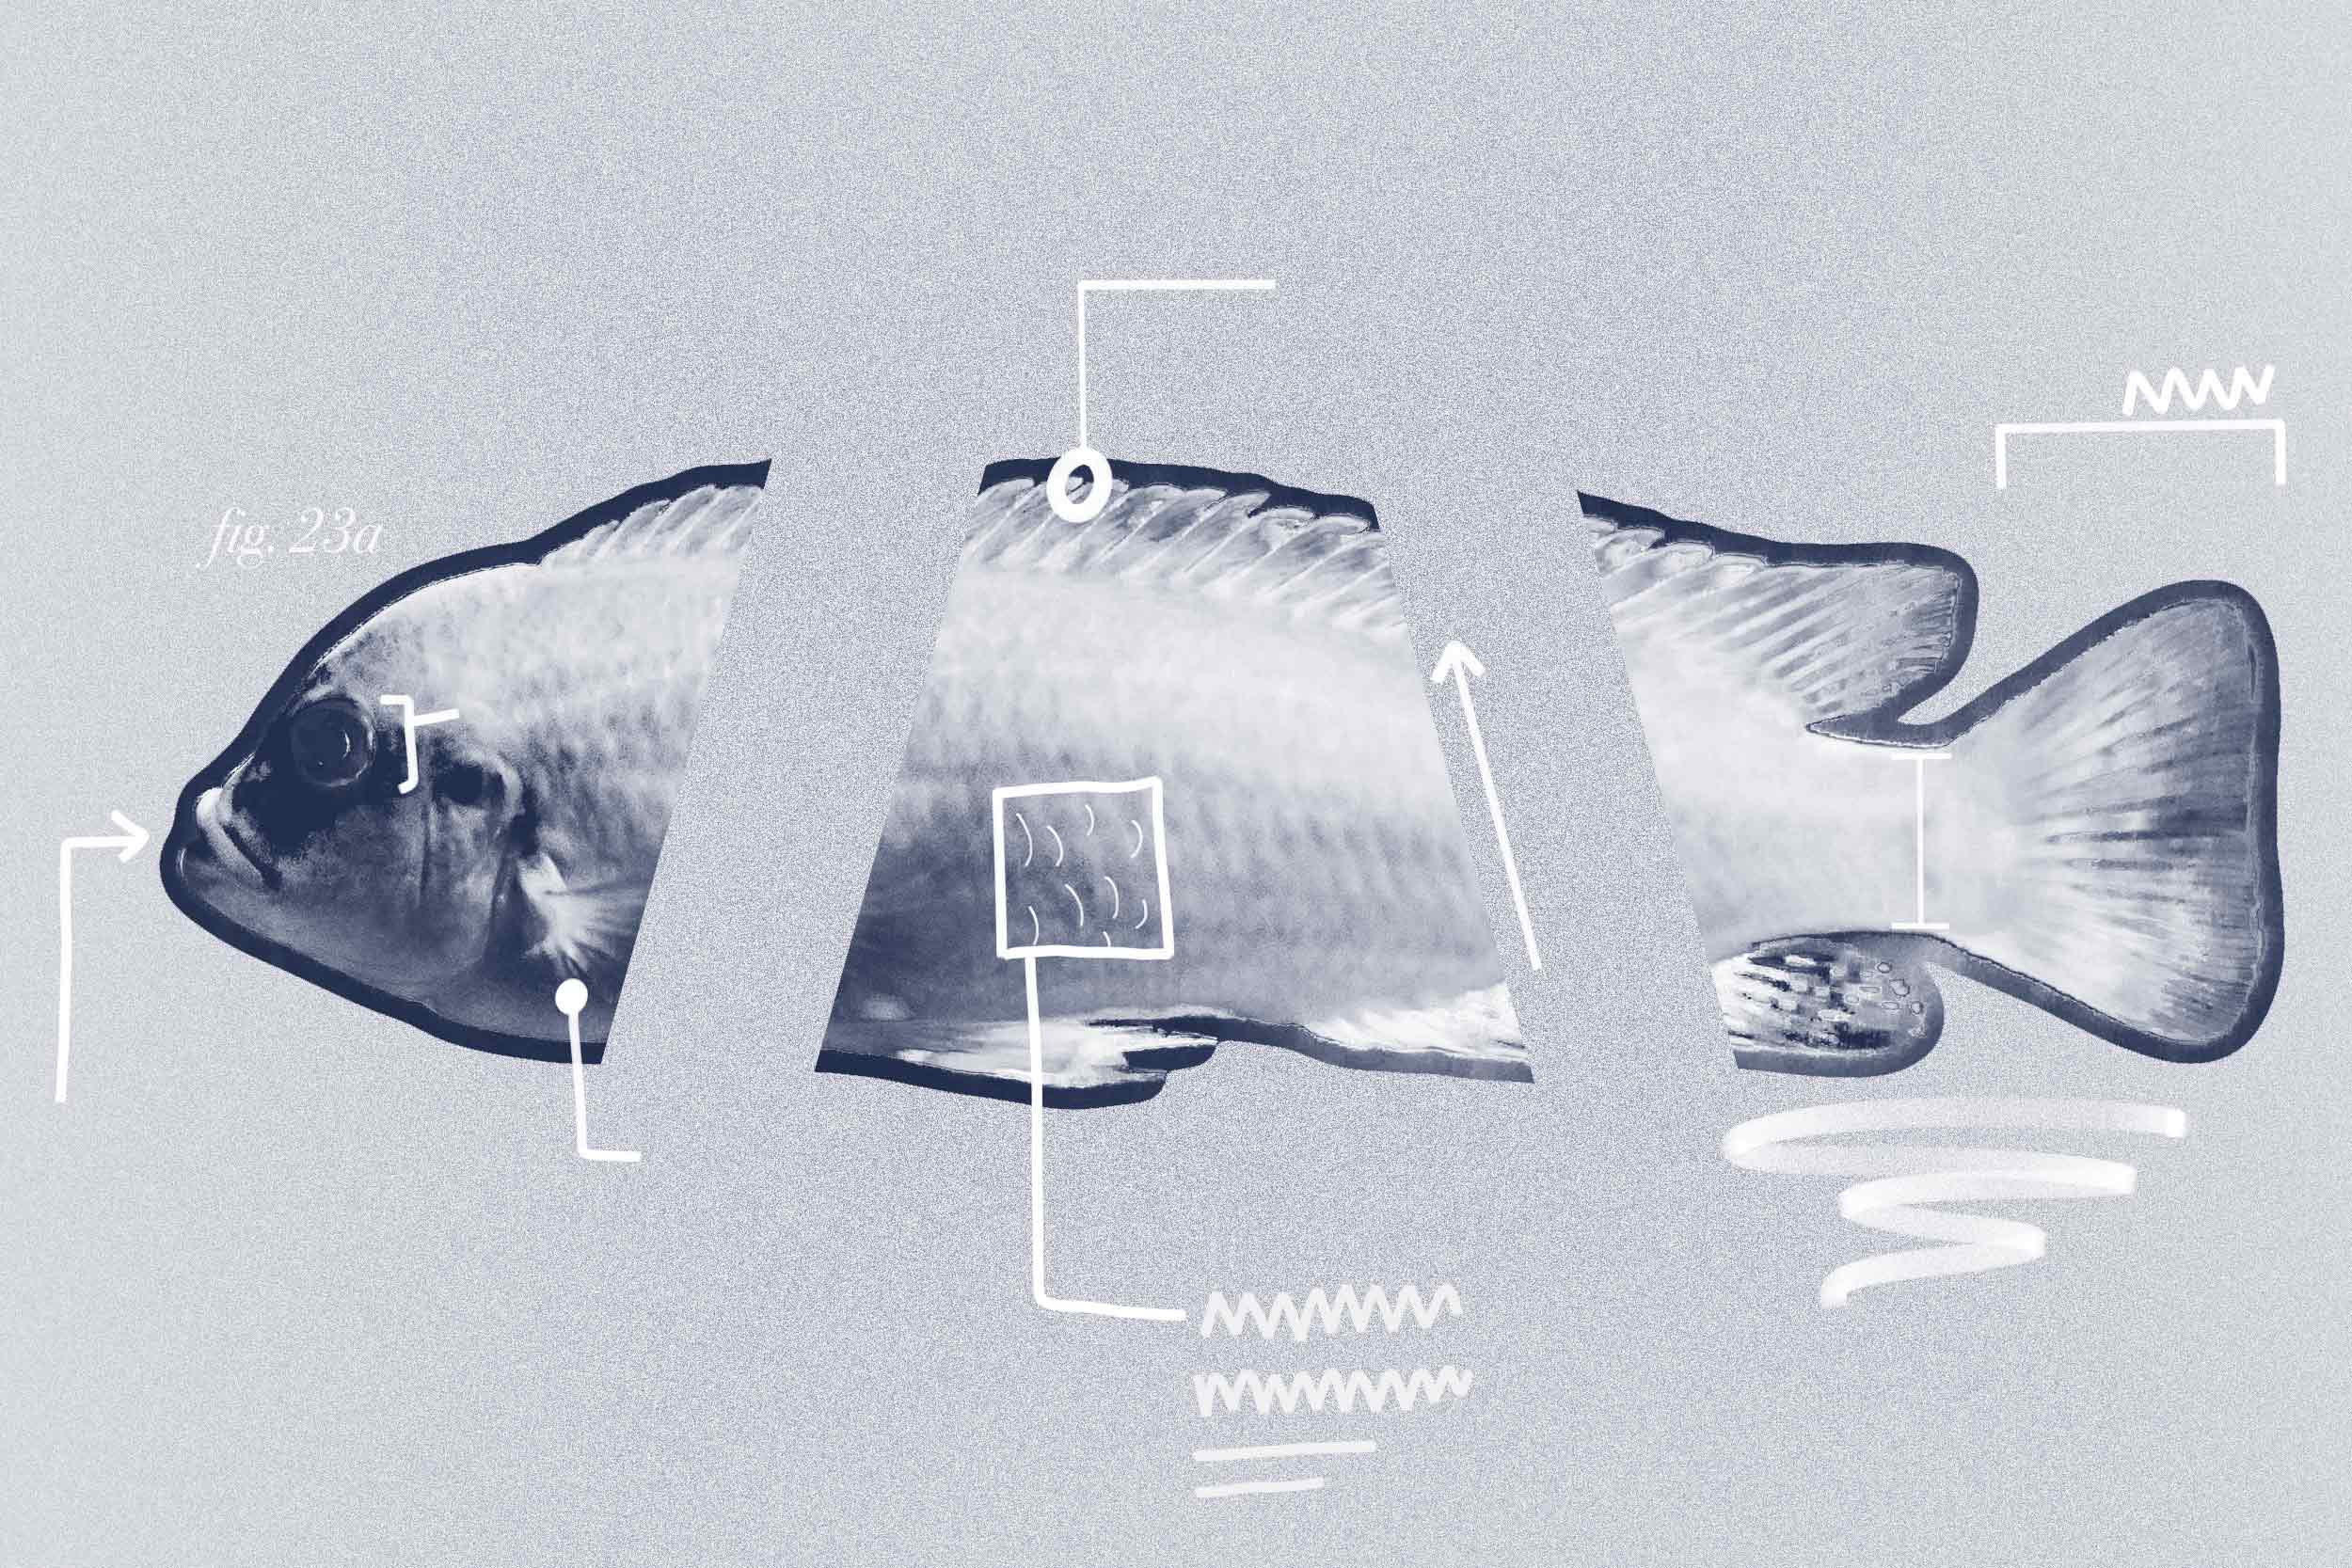 Illustration of a Fish dissected with lines pointing to text